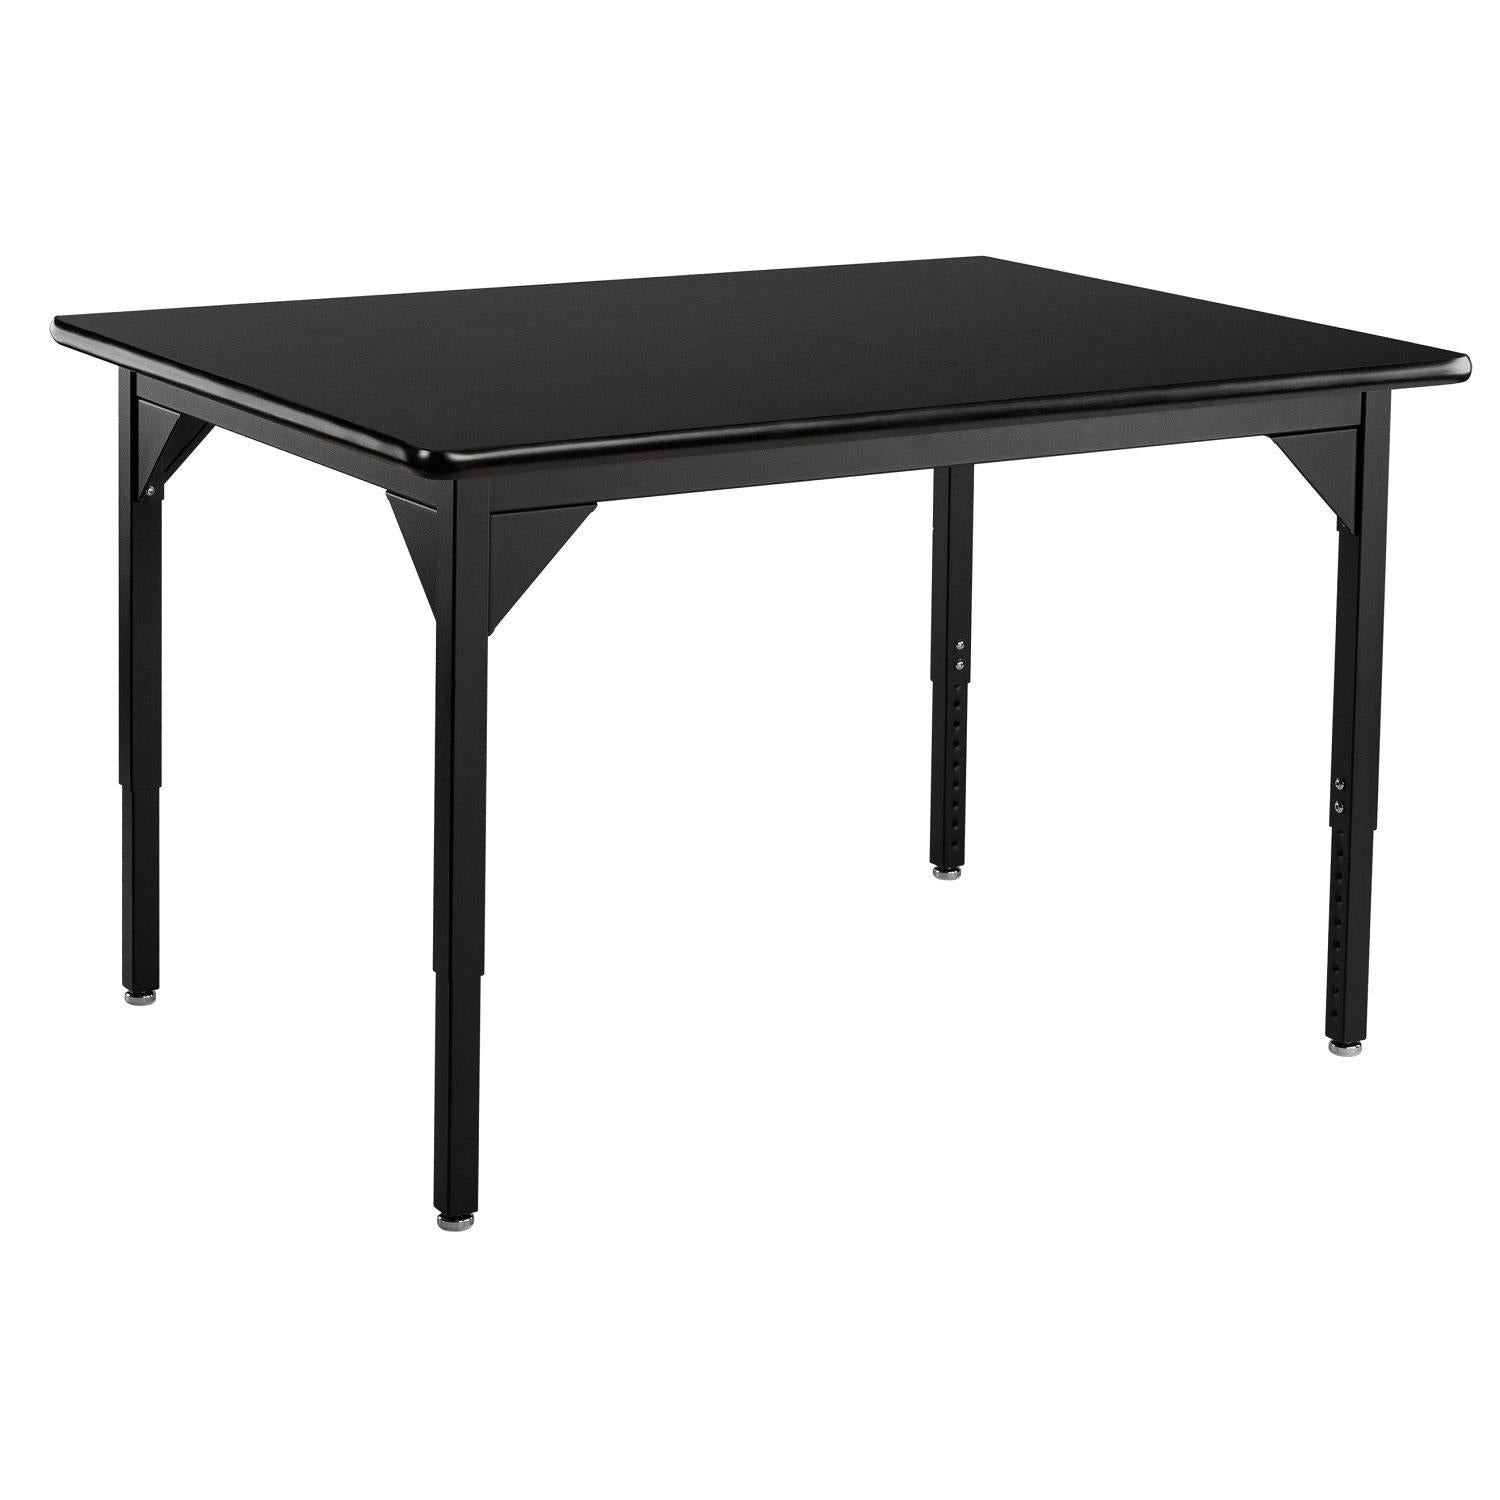 Heavy-Duty Height-Adjustable Utility Table, Black Frame, 36" x 48", High-Pressure Laminate Top with T-Mold Edge